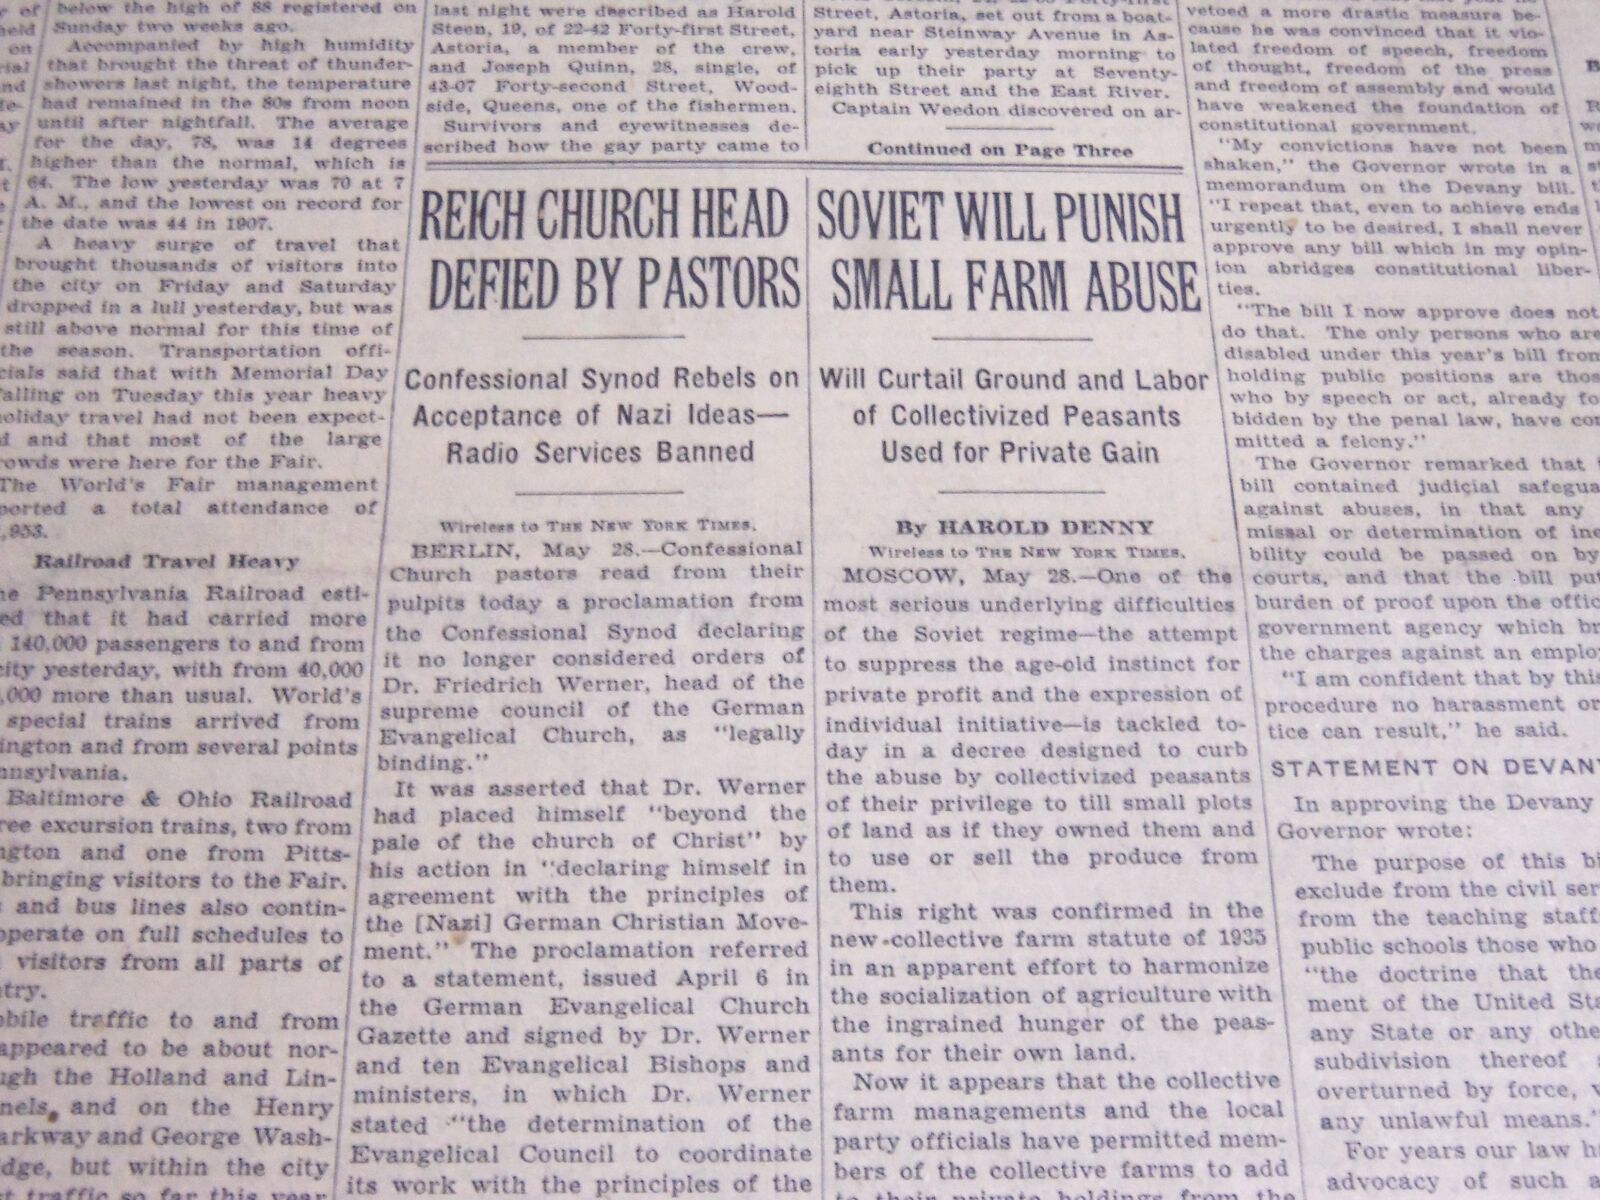 1939 MAY 29 NEW YORK TIMES - REICH CHURCH HEAD DEFIED BY PASTORS - NT 6848